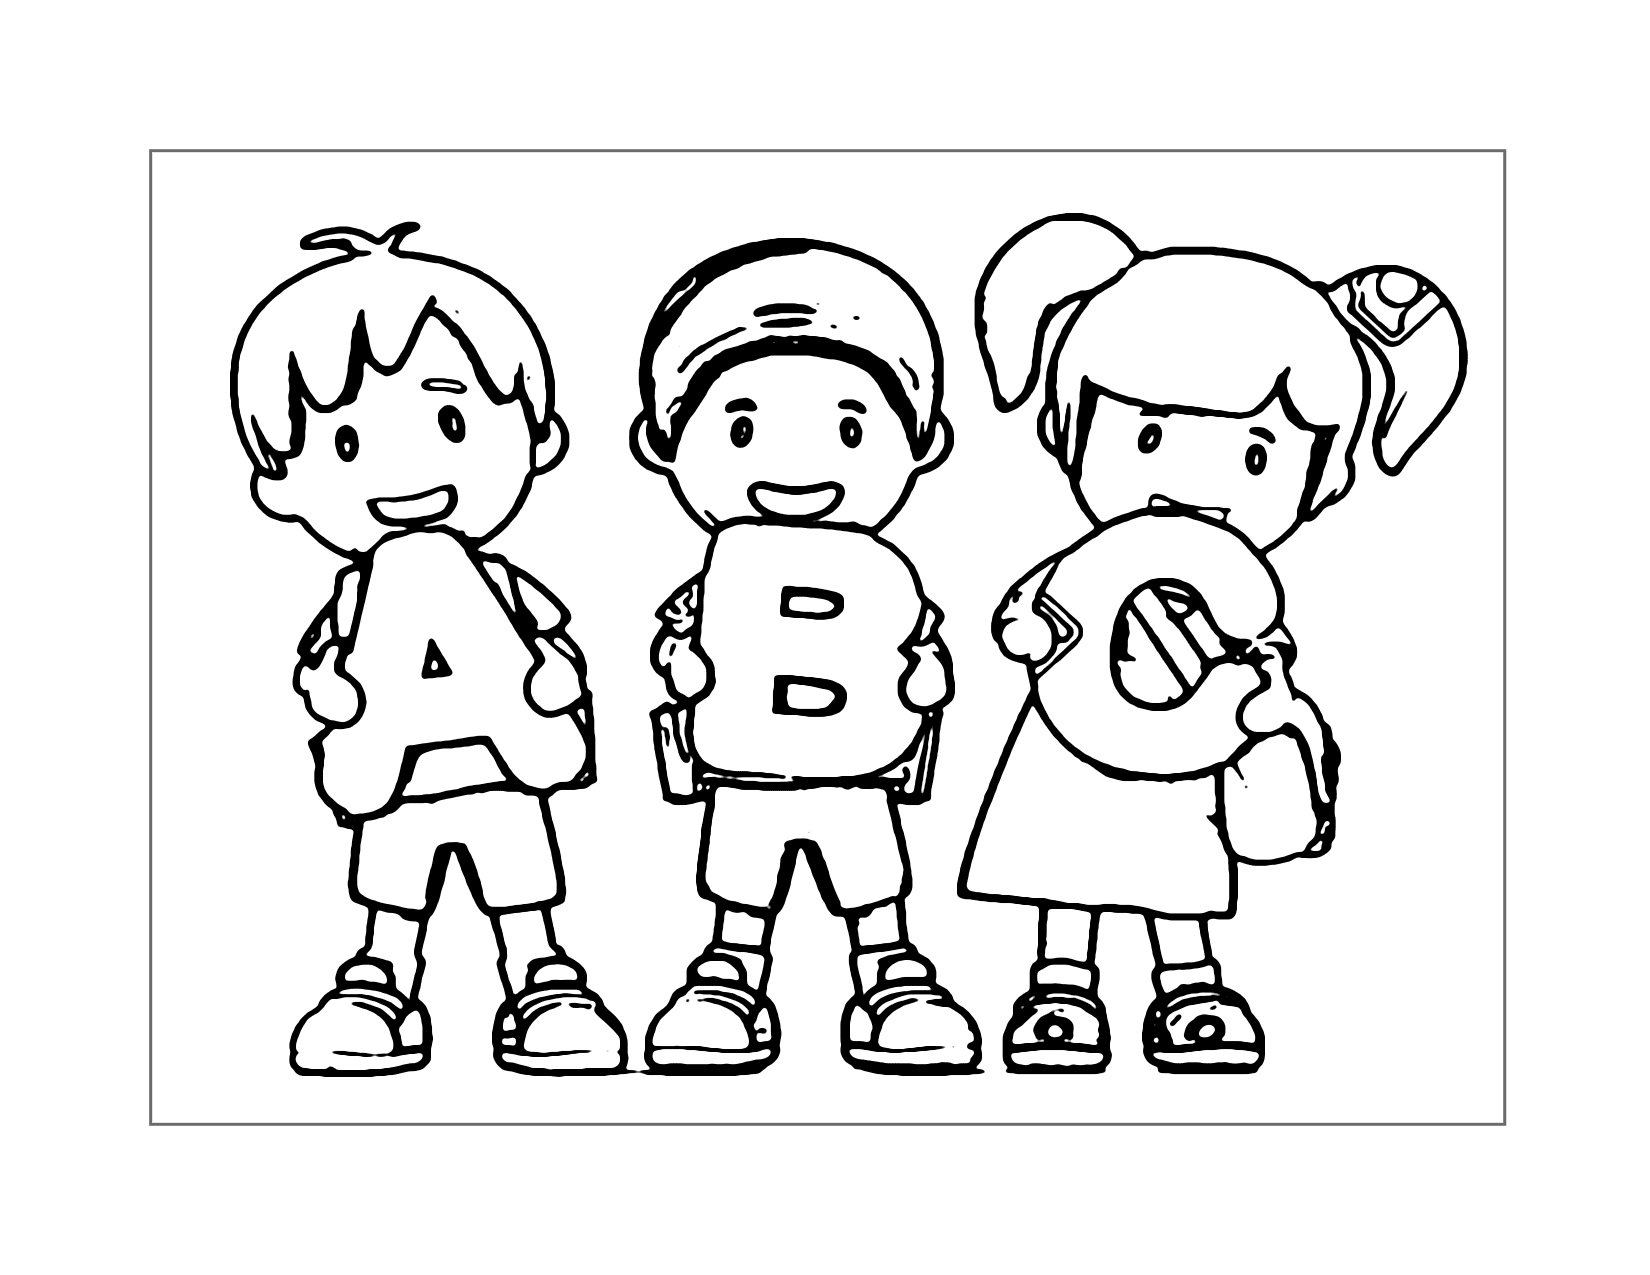 Kids Holding Abc Letters Coloring Page